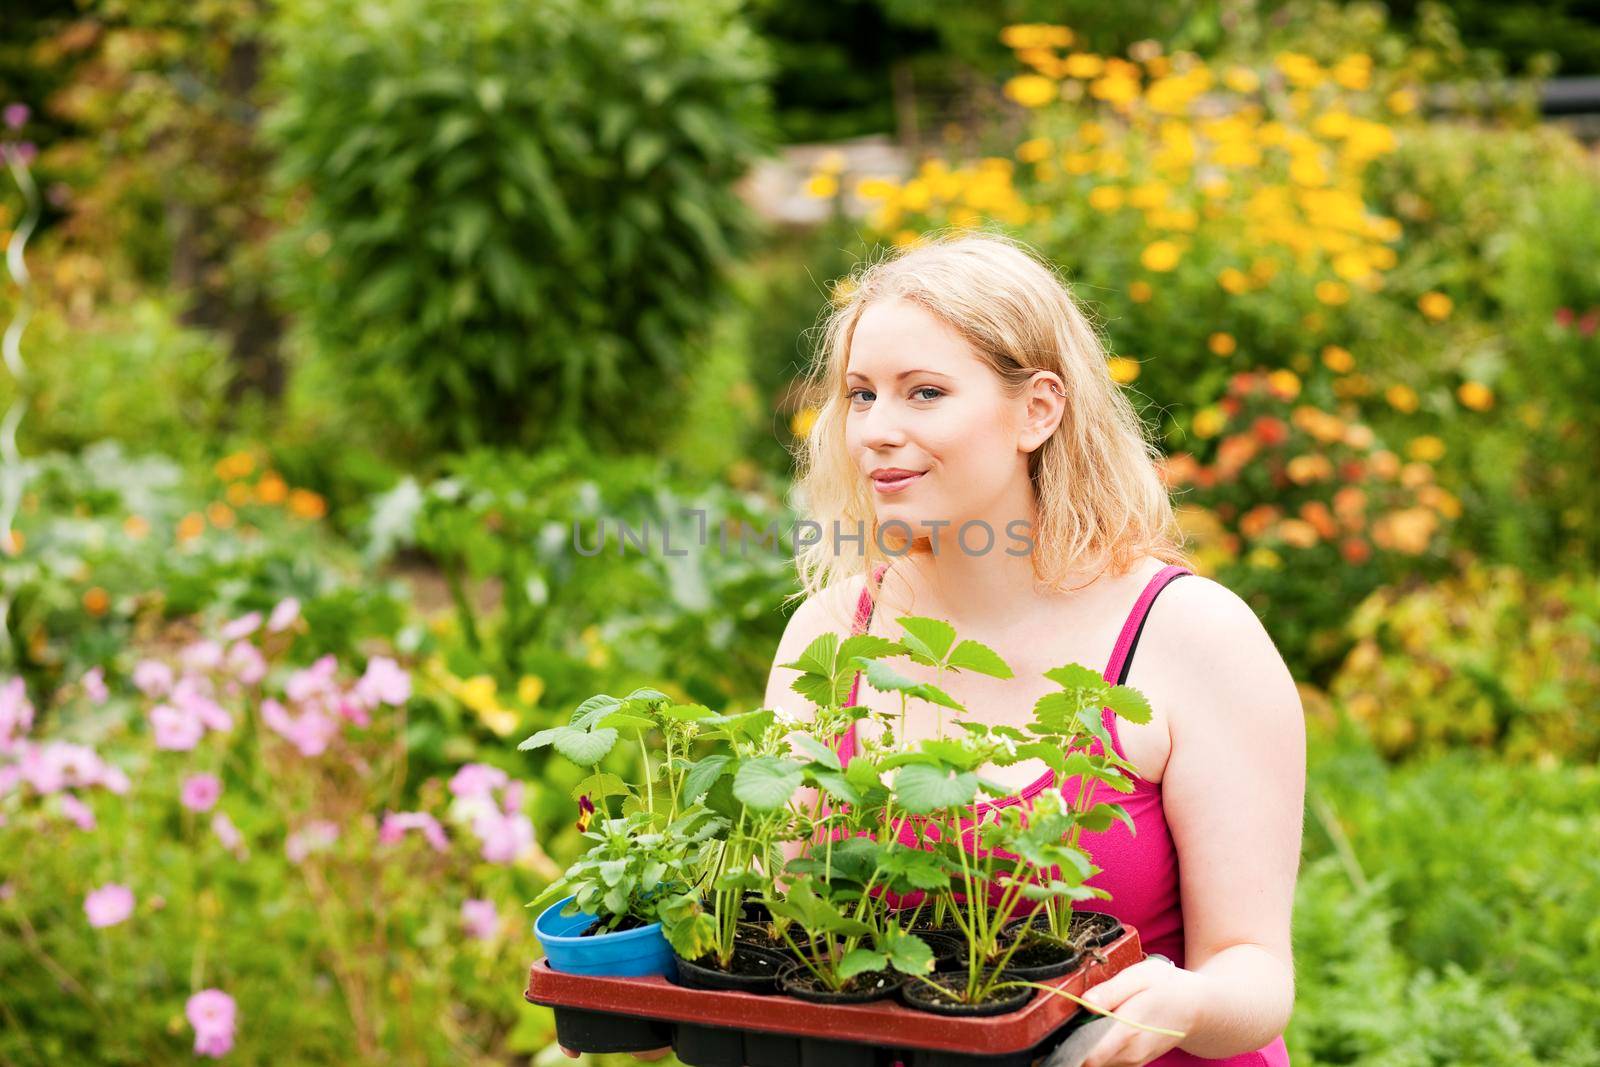 Gardening - Young blonde woman with strawberry seedlings attempting to plant them in her garden